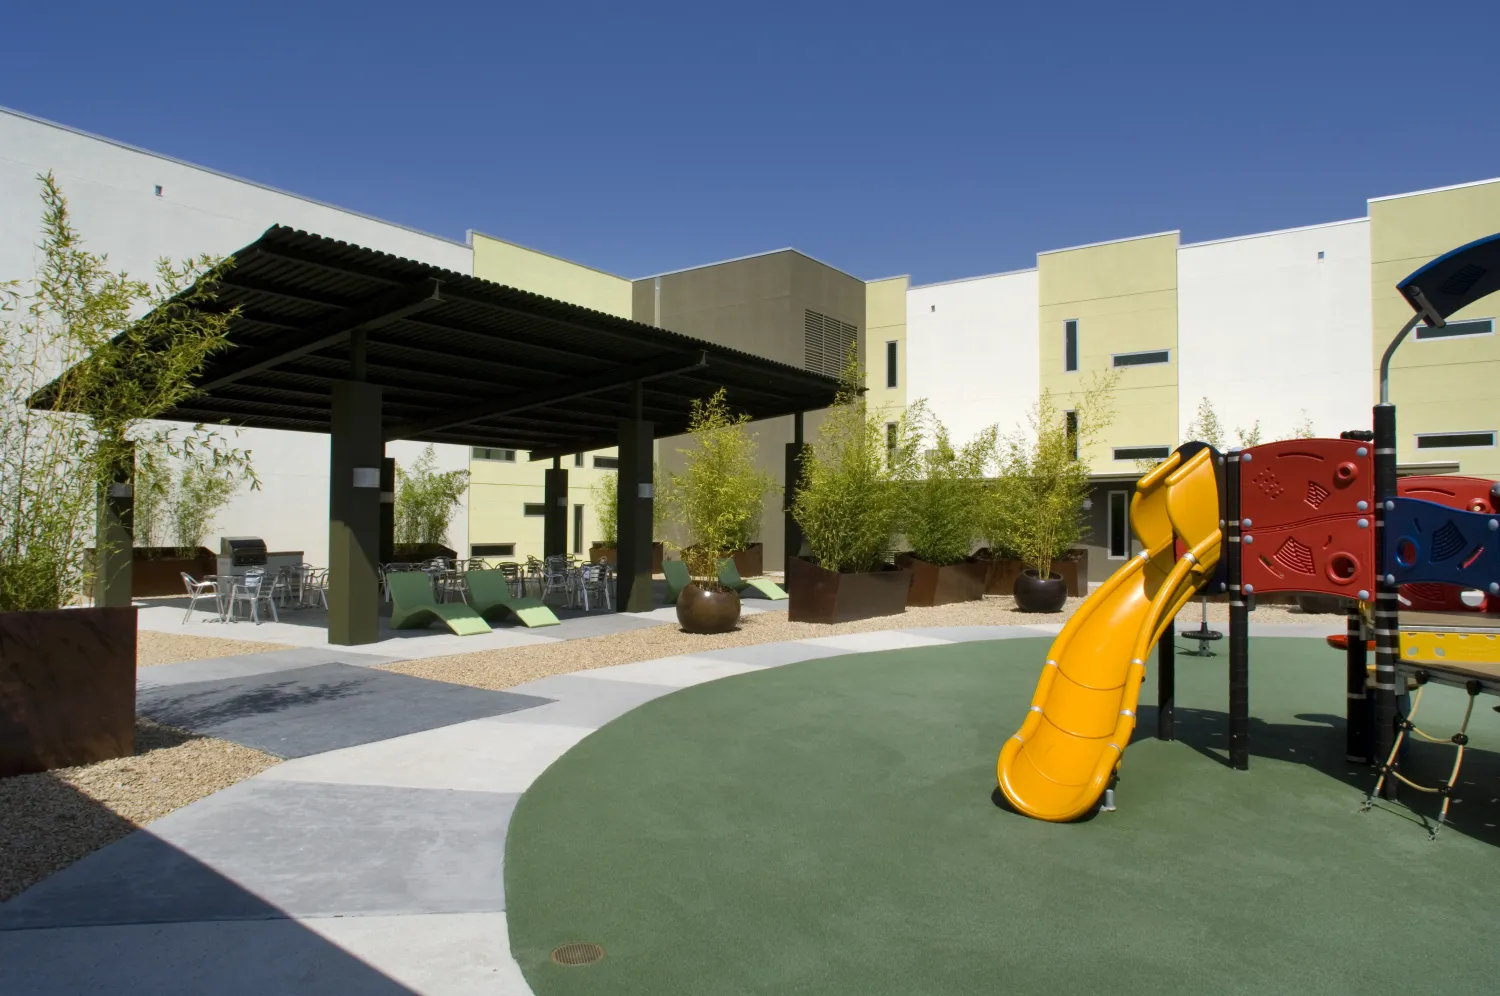 Playground and seating area on the rooftop on Delmas Park in San Jose, California.